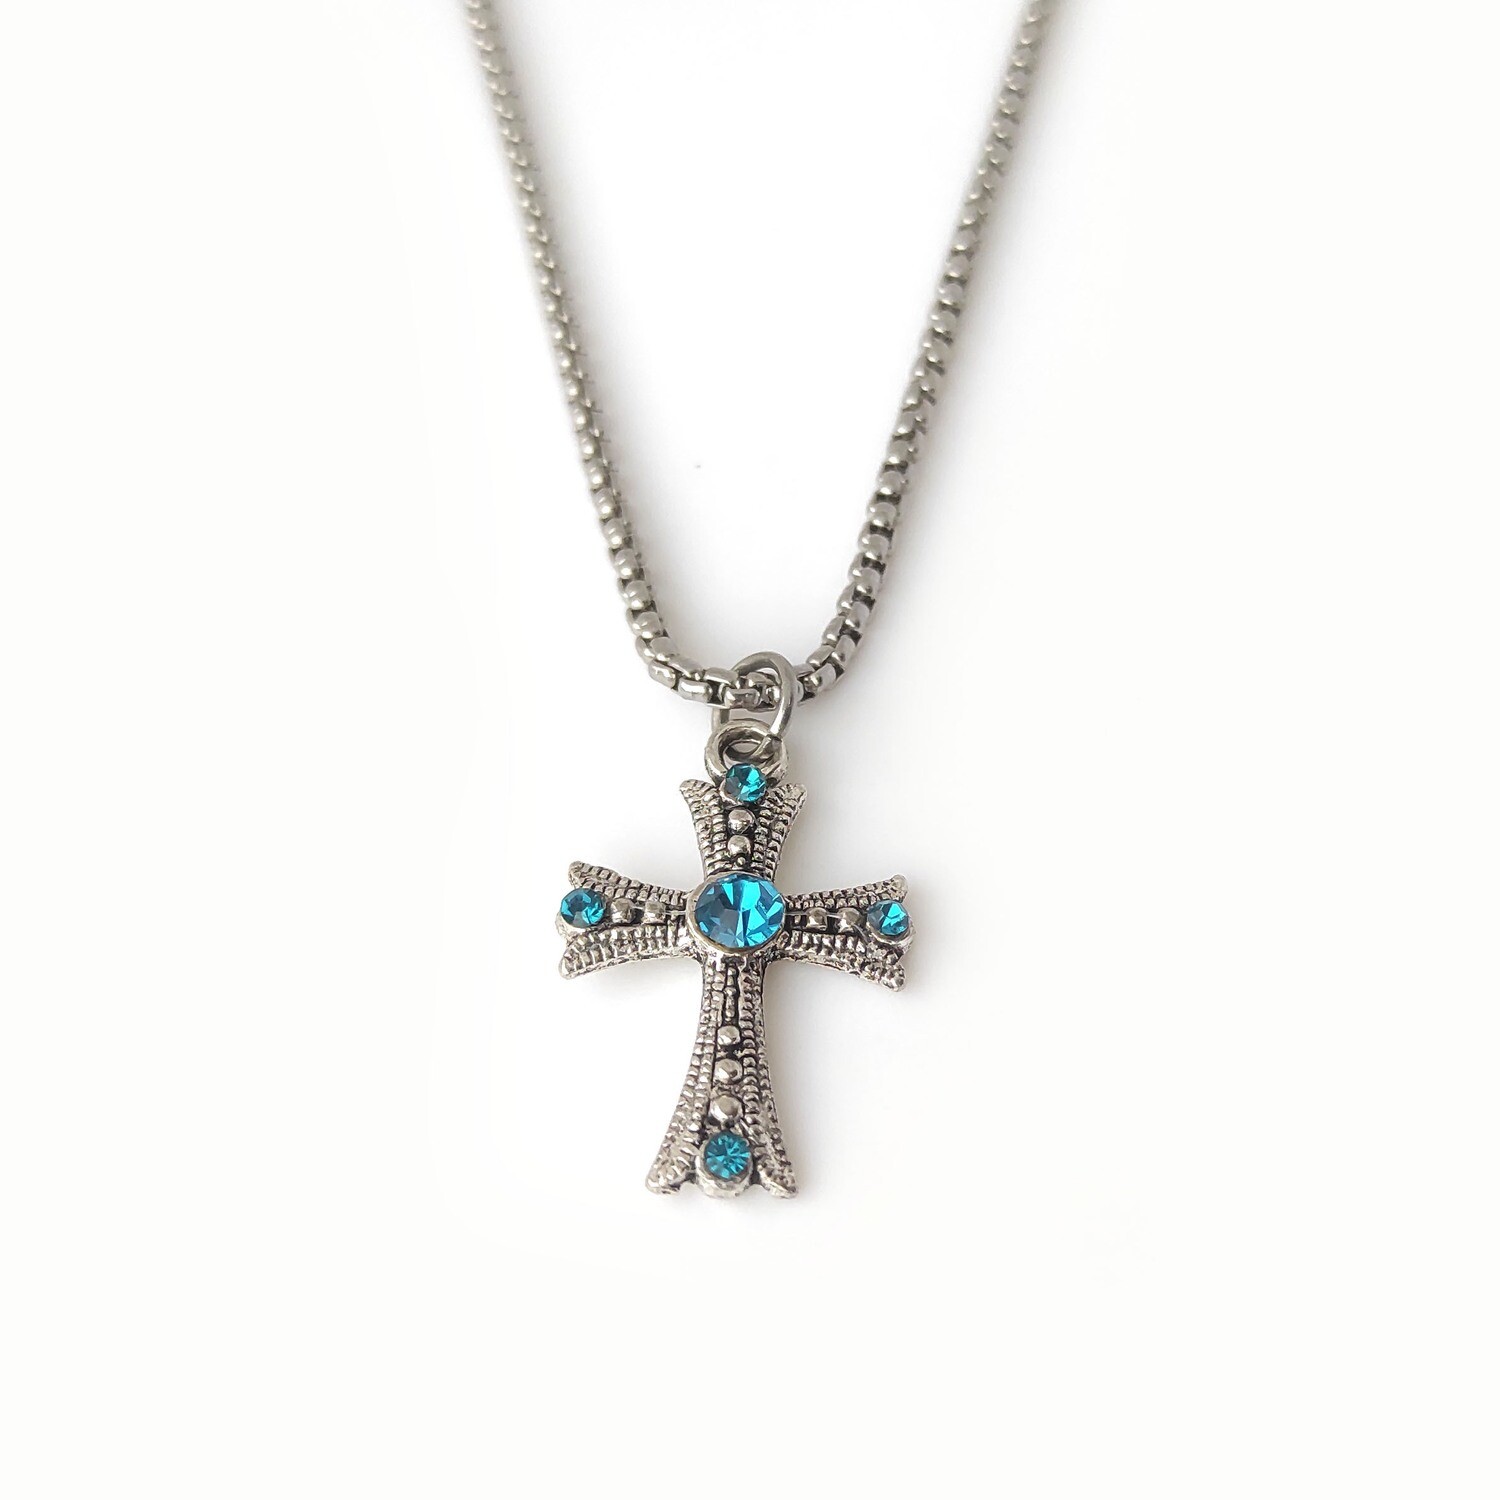 Turquoise Cross necklace